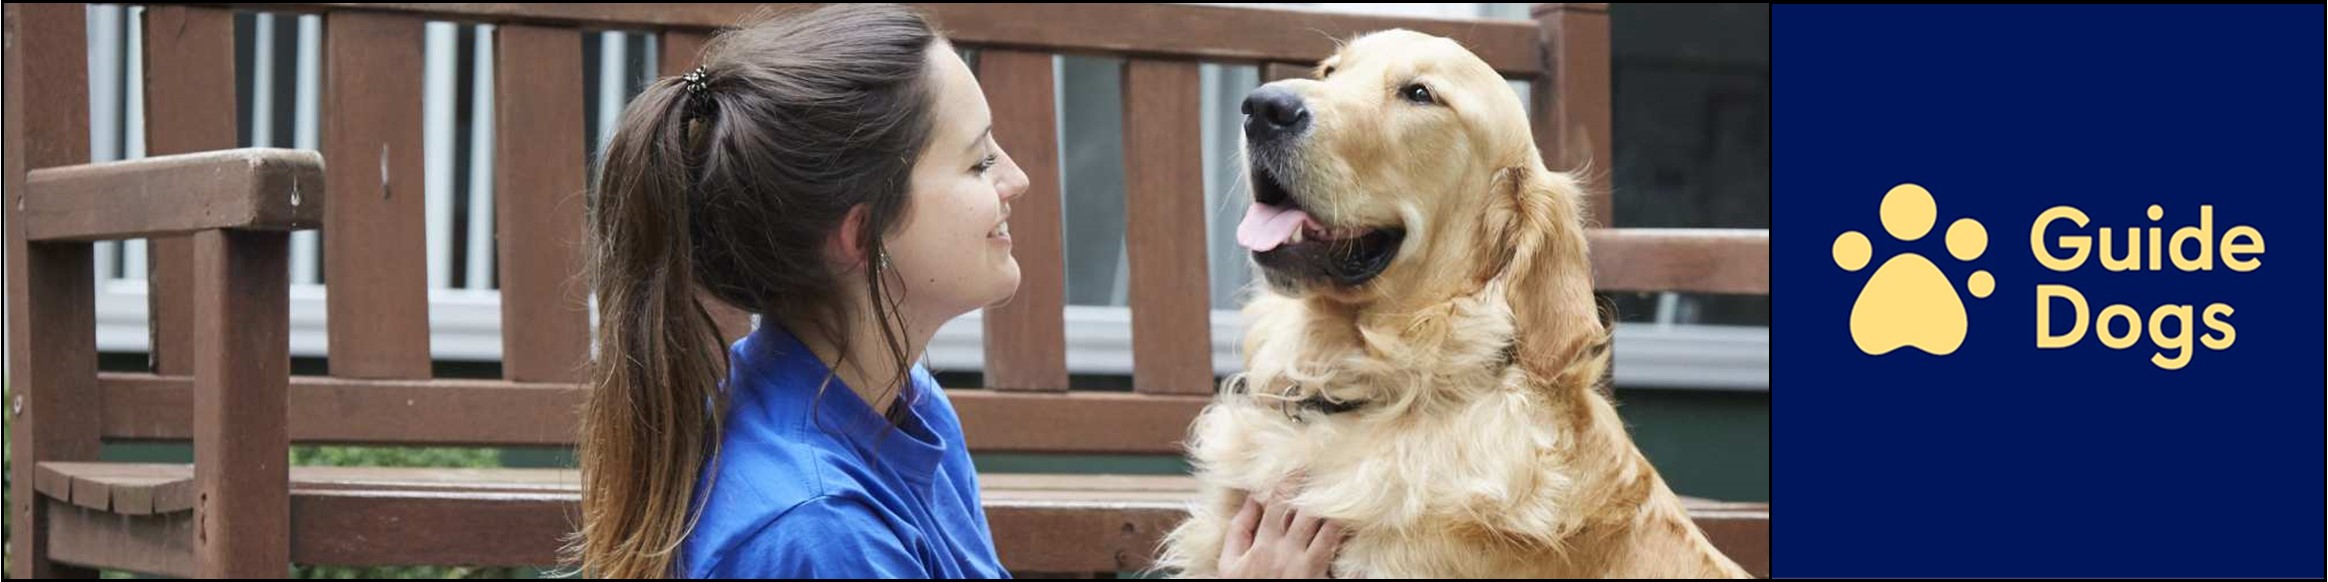 Guide Dogs Jobs, Careers and Vacancies. Volunteer Team Recruitment Officer / Volunteering Coordinator vacancy in Birmingham, West Midlands Advertised by AWD online – Multi-Job Board Advertising and CV Sourcing Recruitment Services